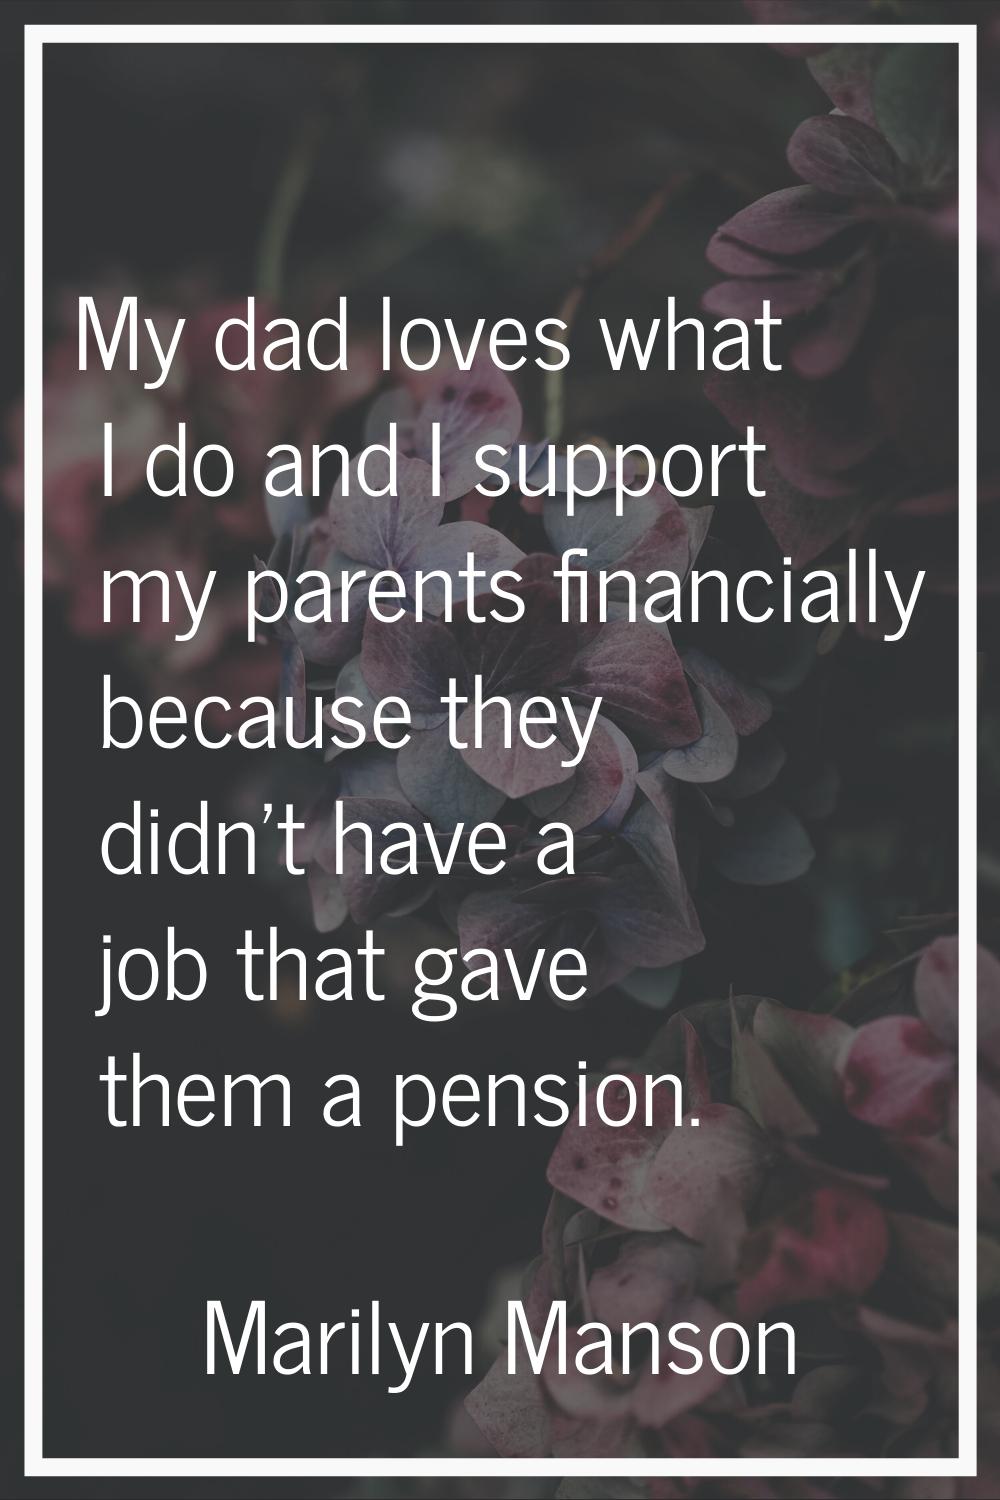 My dad loves what I do and I support my parents financially because they didn't have a job that gav